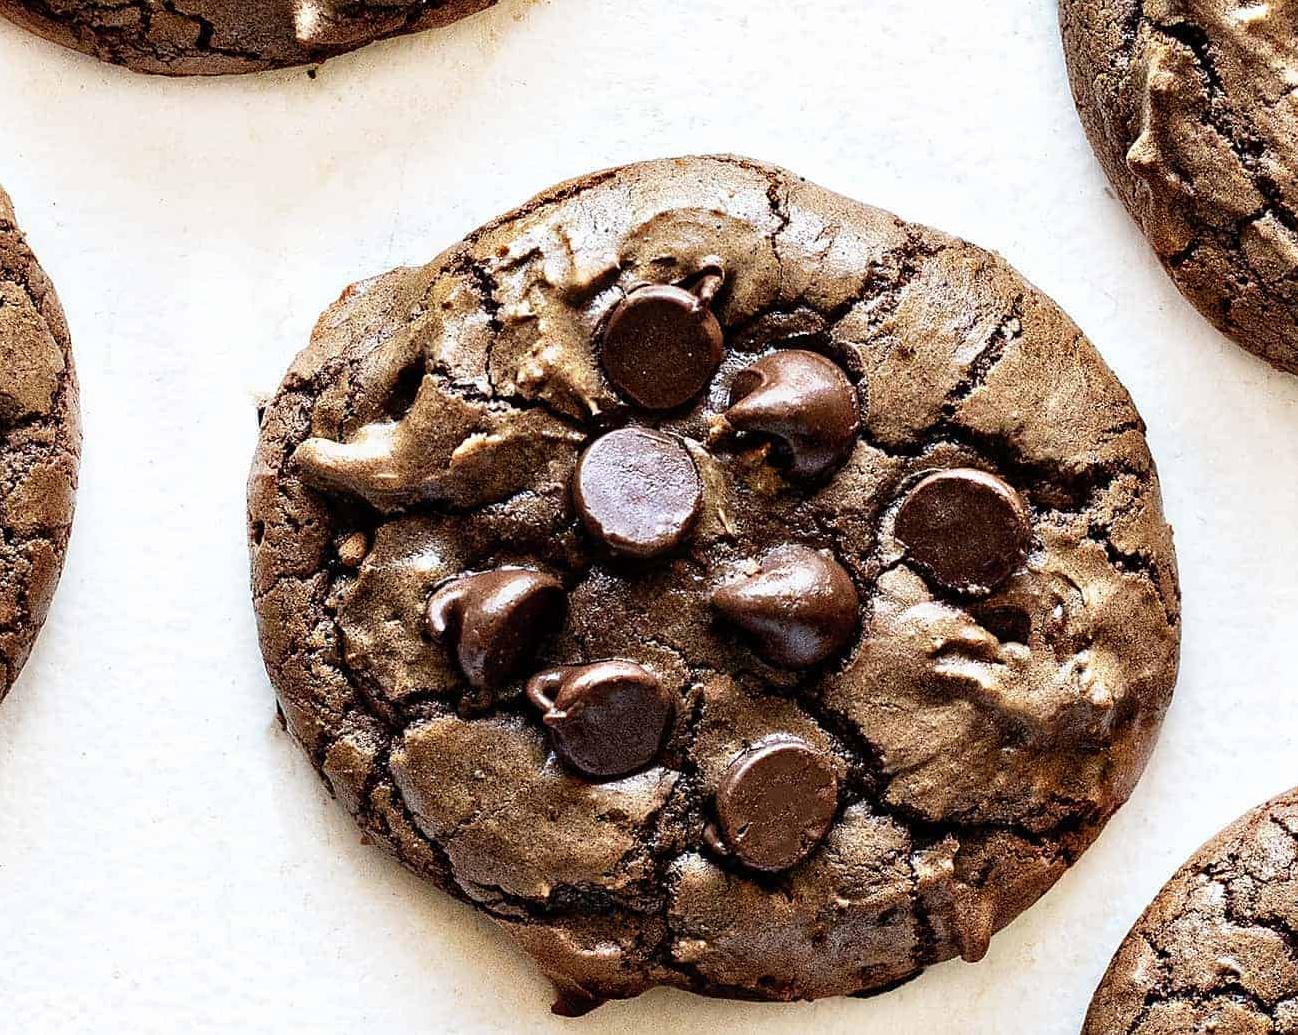  Make a batch of these cookies to impress your friends and family.